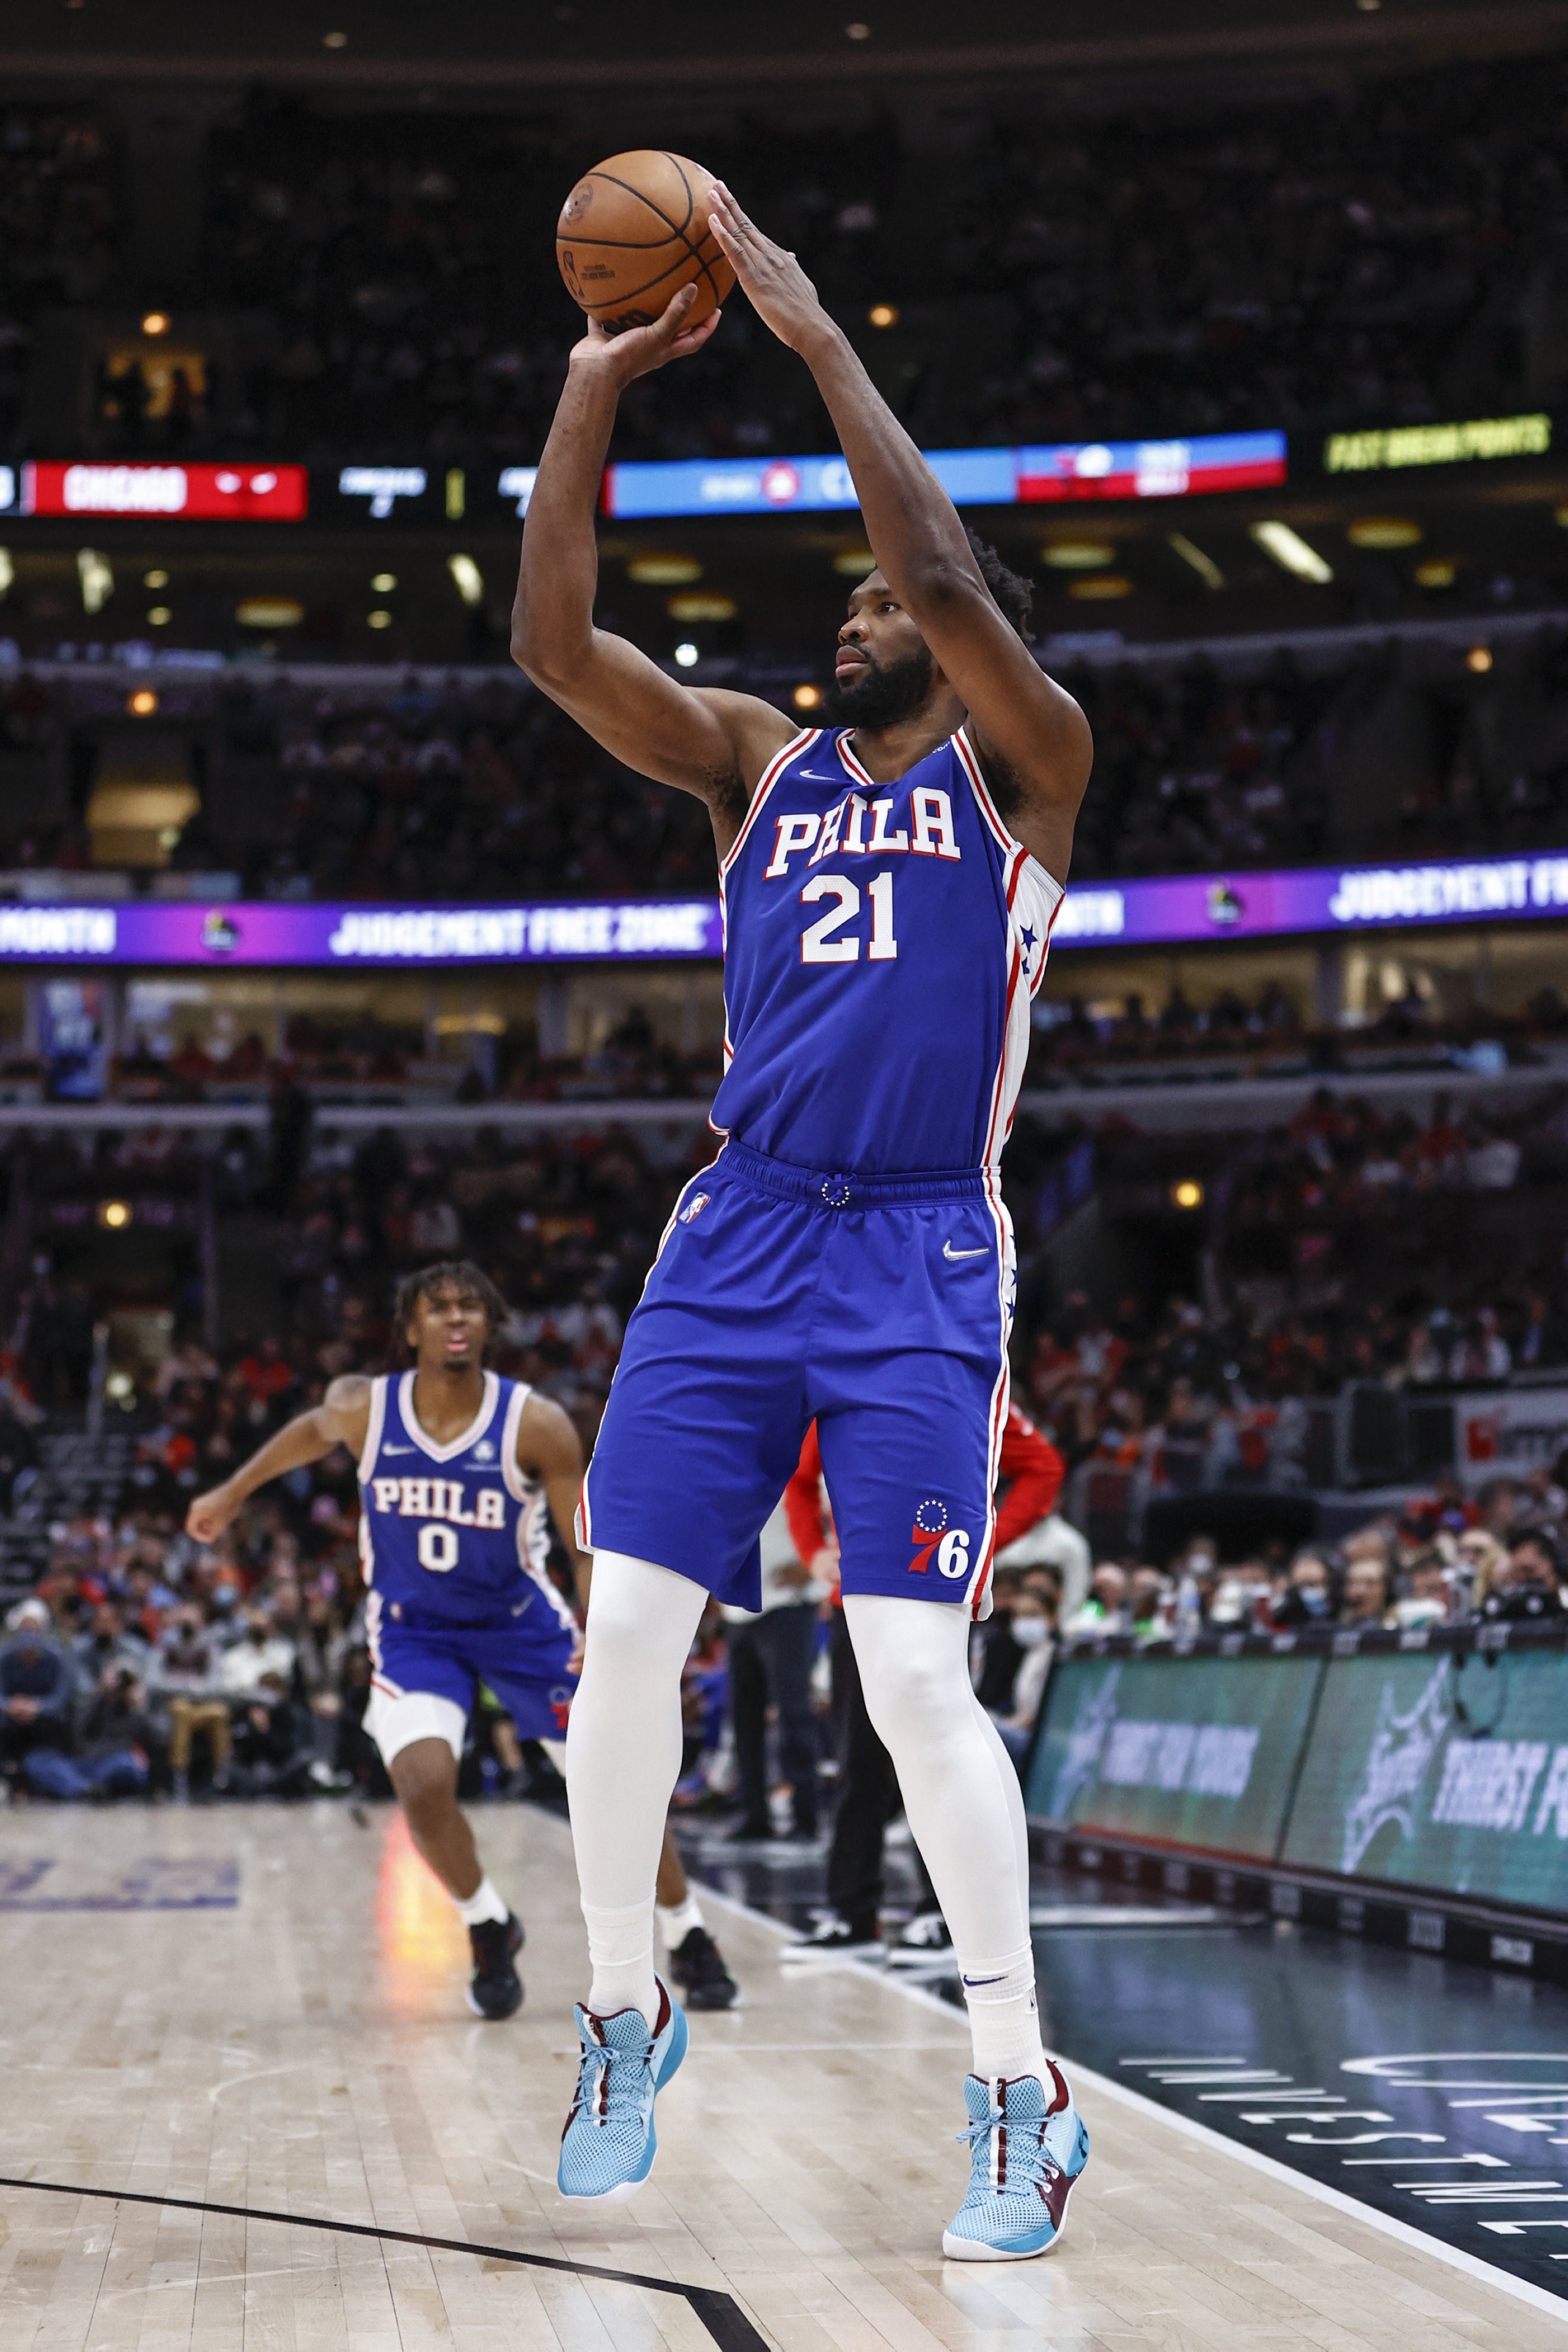 Philadelphia 76ers center Joel Embiid shoots during an NBA game against the Chicago Bulls, Chicago, Illinois, U.S., Feb. 6, 2022. (Rueters Photo)